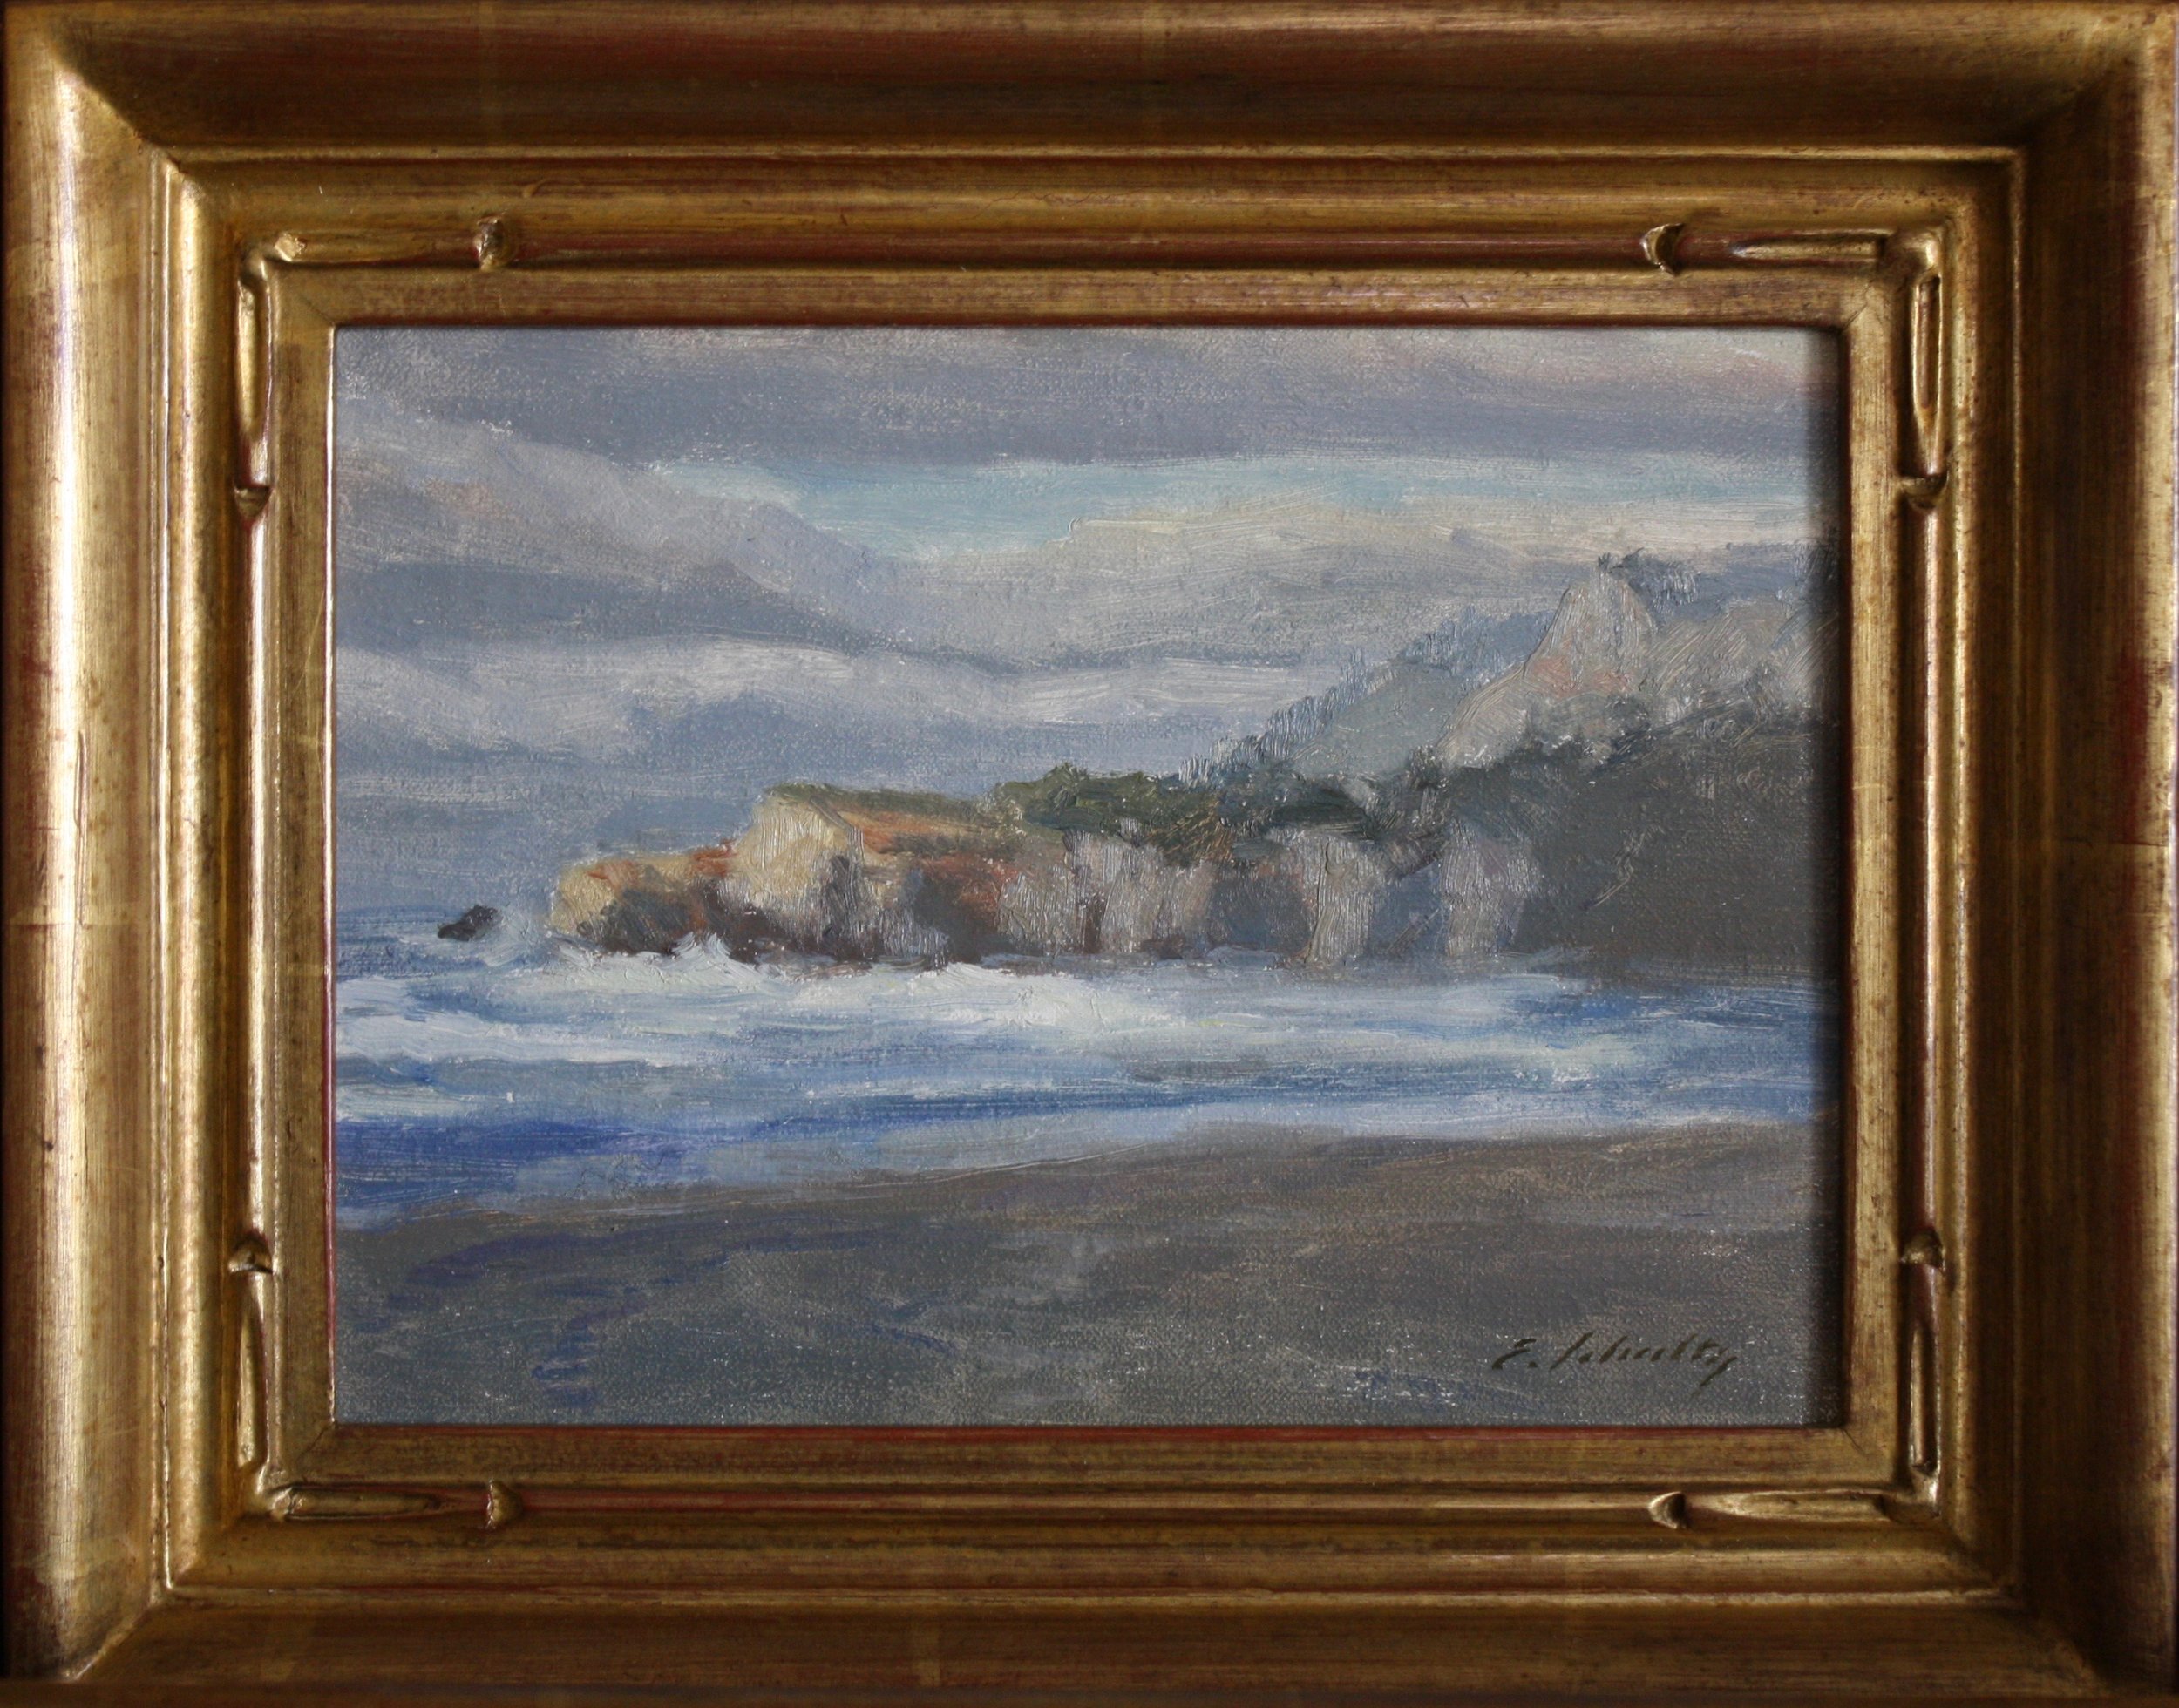 "Punch Bowl Point" 6x8 $350